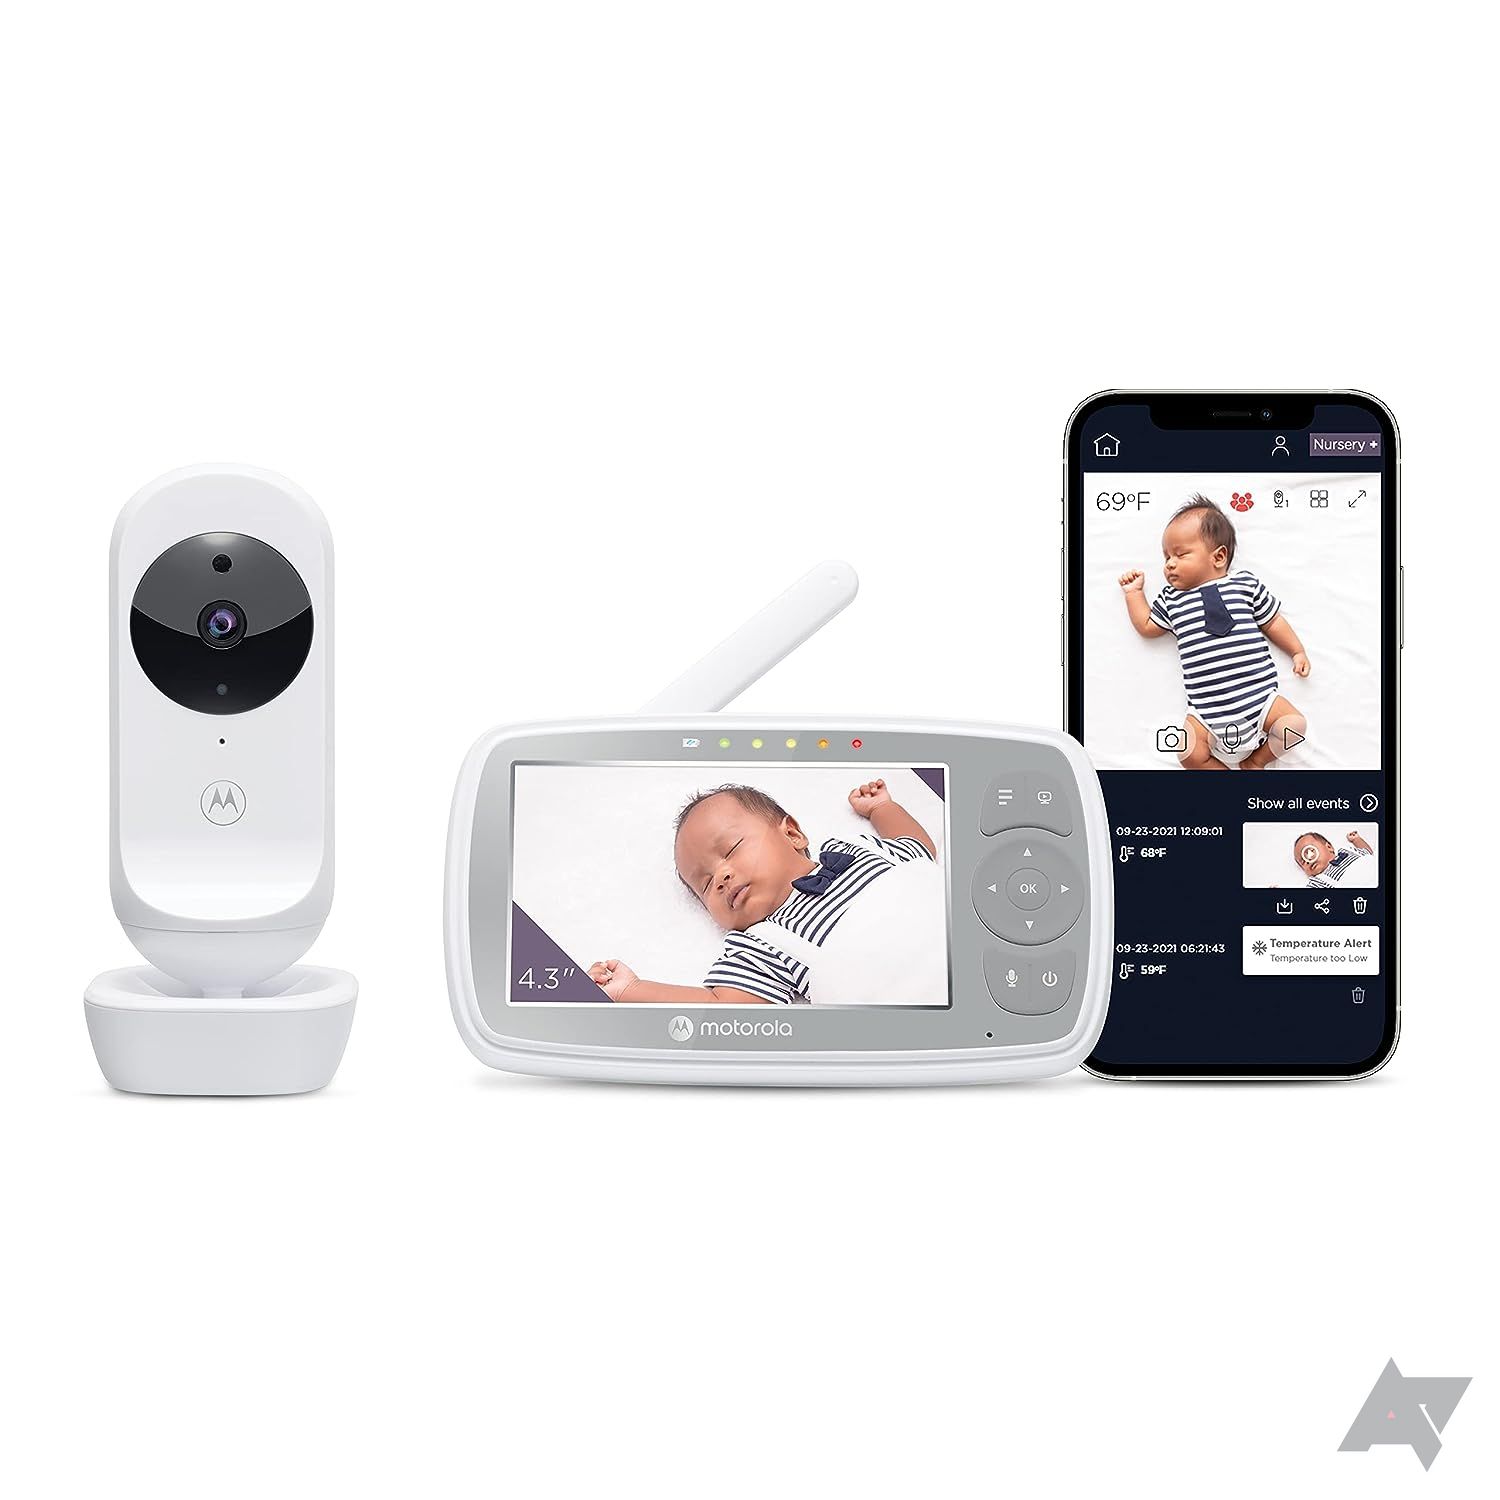 Motorola Baby Monitor VM44, along with smartphone showing app, in white background